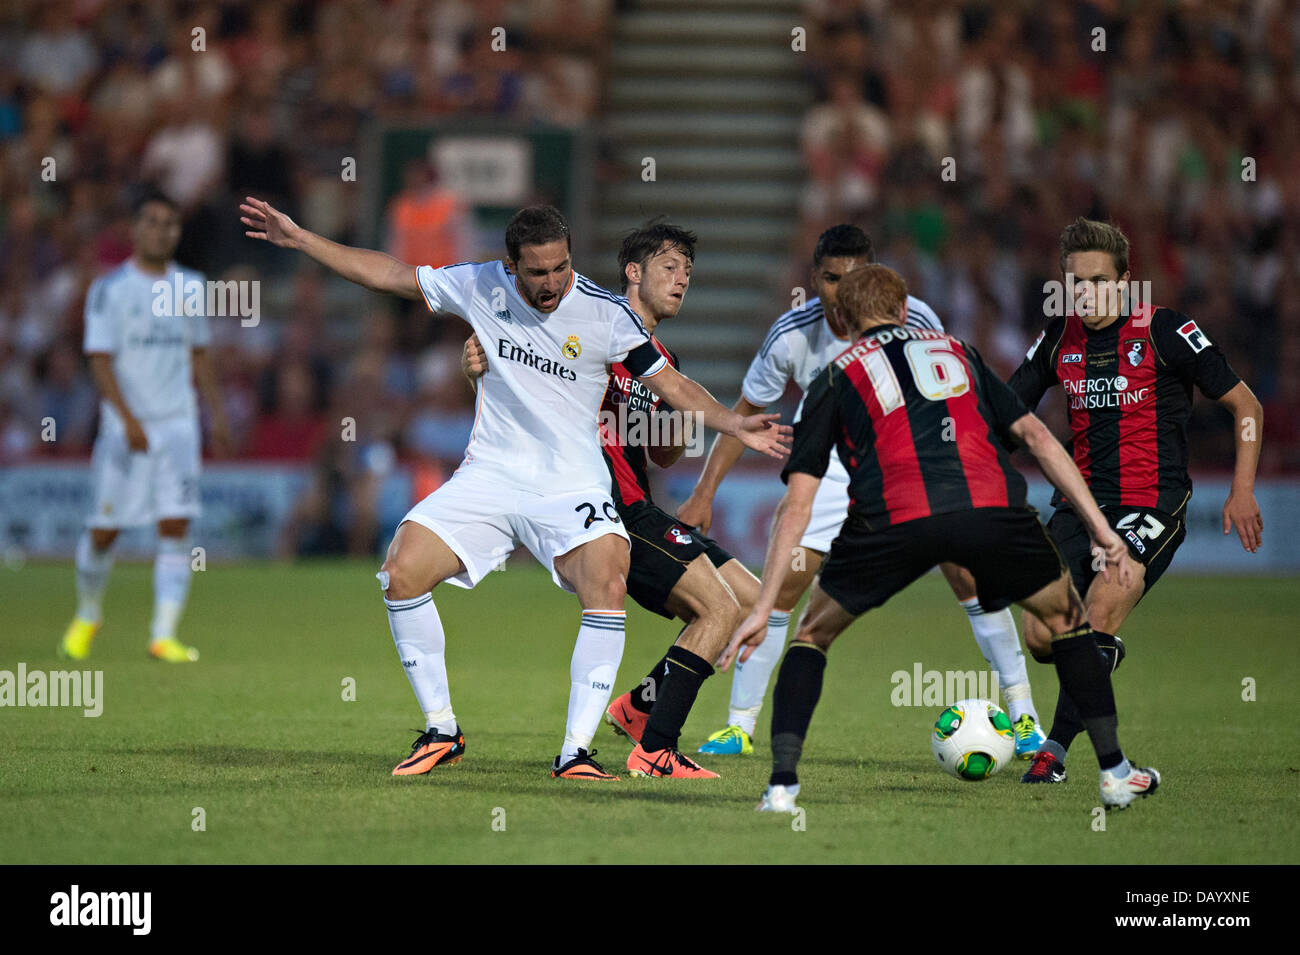 Bournemouth, UK. 21st July, 2013. Bournemouth AFC vs Real Madrid - Sunday 21st July 2013. Bournemouth, UK. Scorer of the 4th goal Gonzalo Higuain is pulled back and off the ball during a run in the second half. Credit:  MeonStock/Alamy Live News Stock Photo